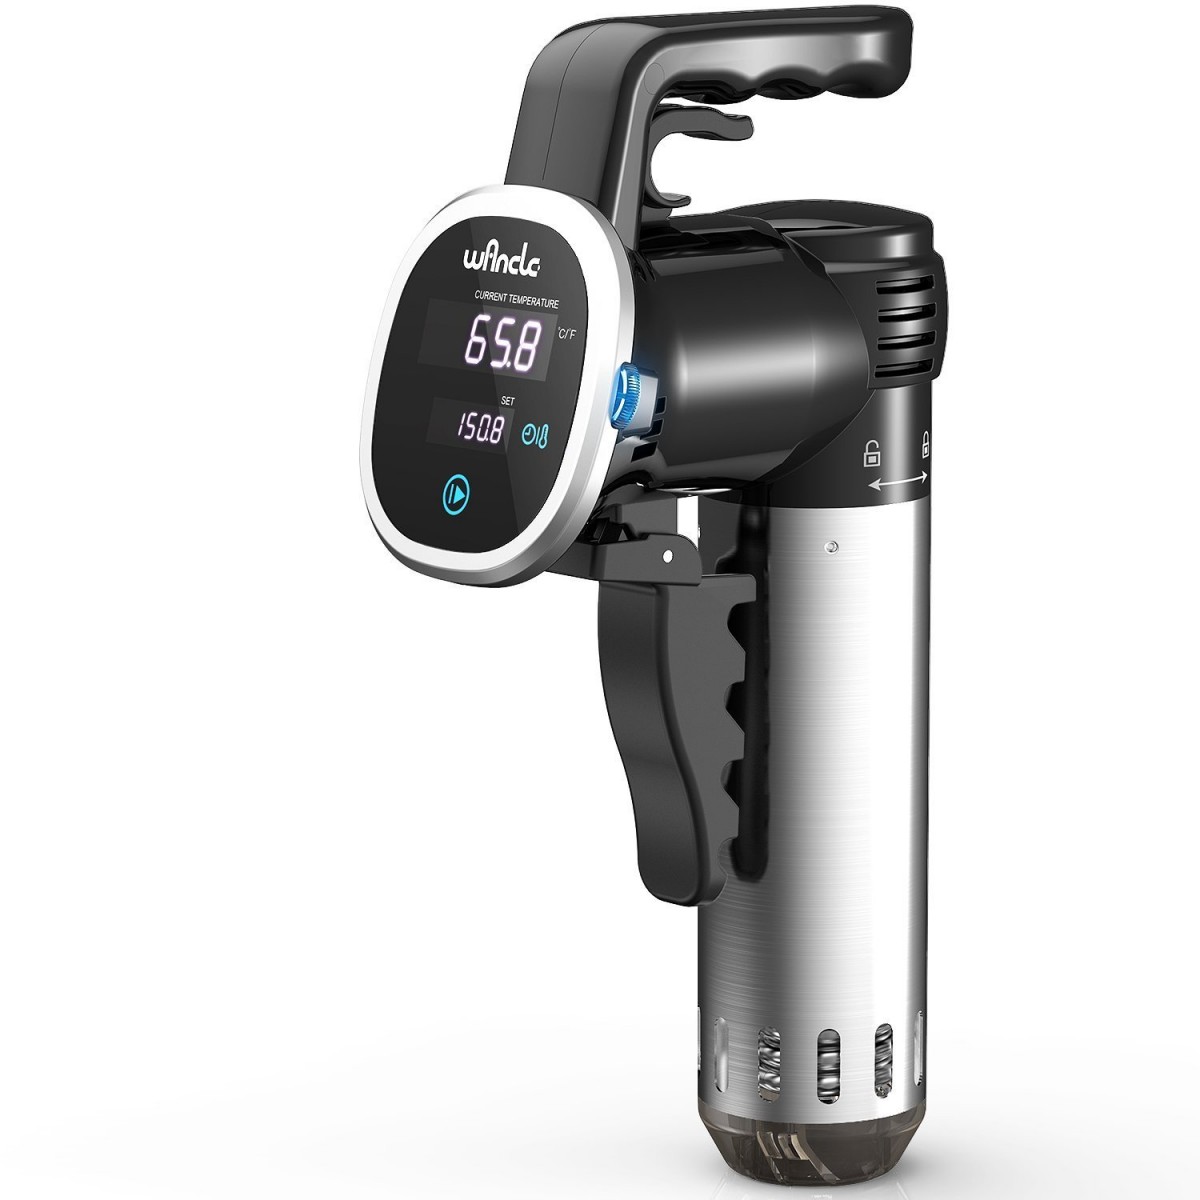 Wancle Thermal Immersion Circulator Review